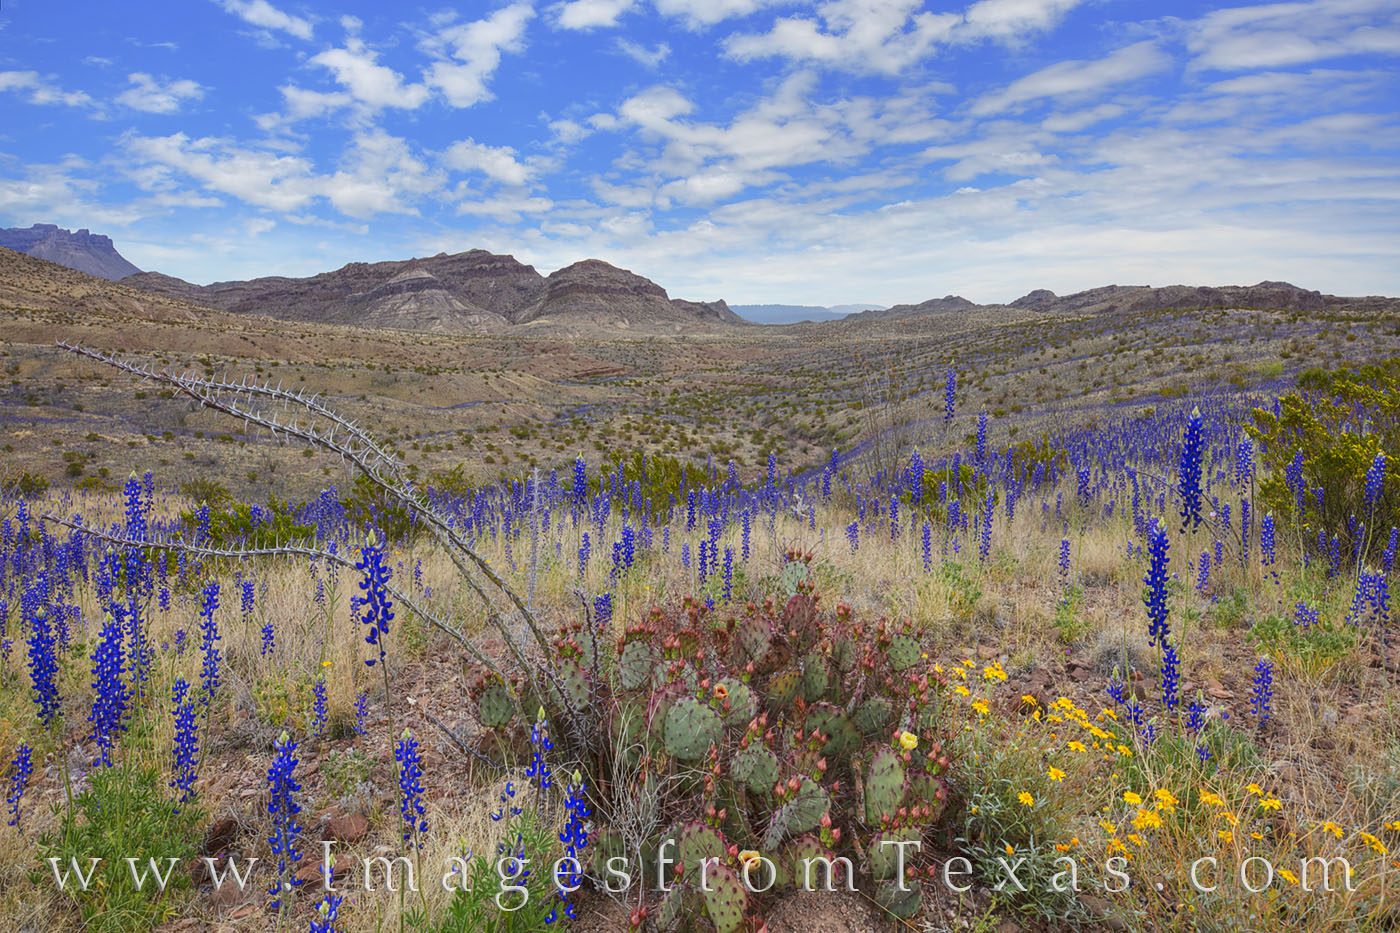 A mix of beautiful wildflowers and prickly pear filled the desert landscape of Big Bend National Park on this cool March morning...